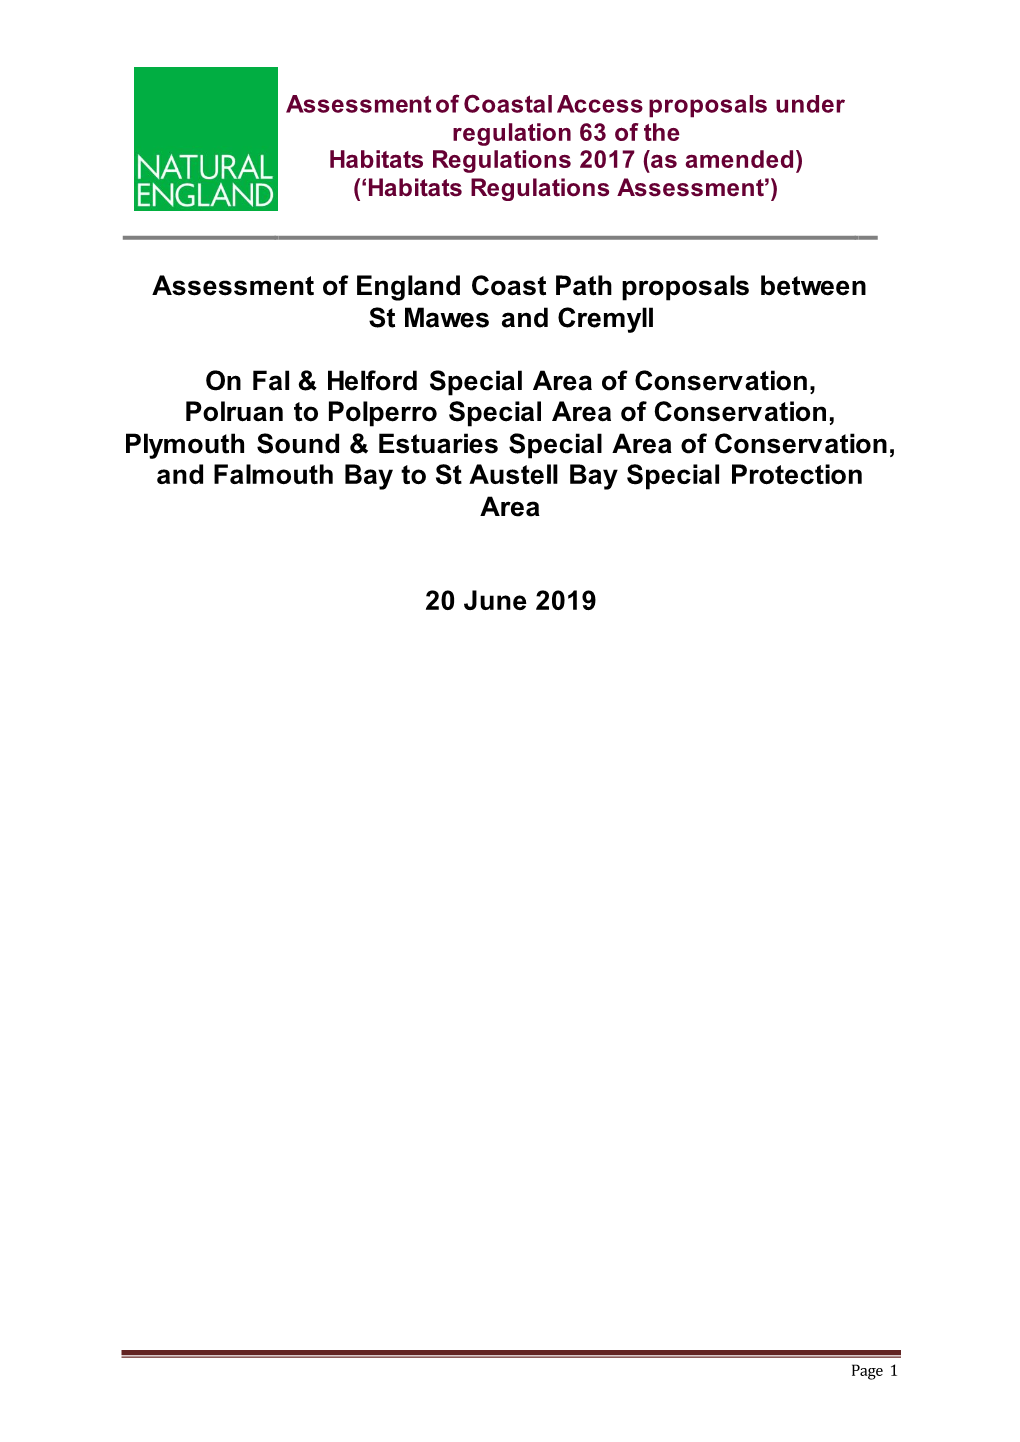 Assessment of England Coast Path Proposals Between St Mawes and Cremyll